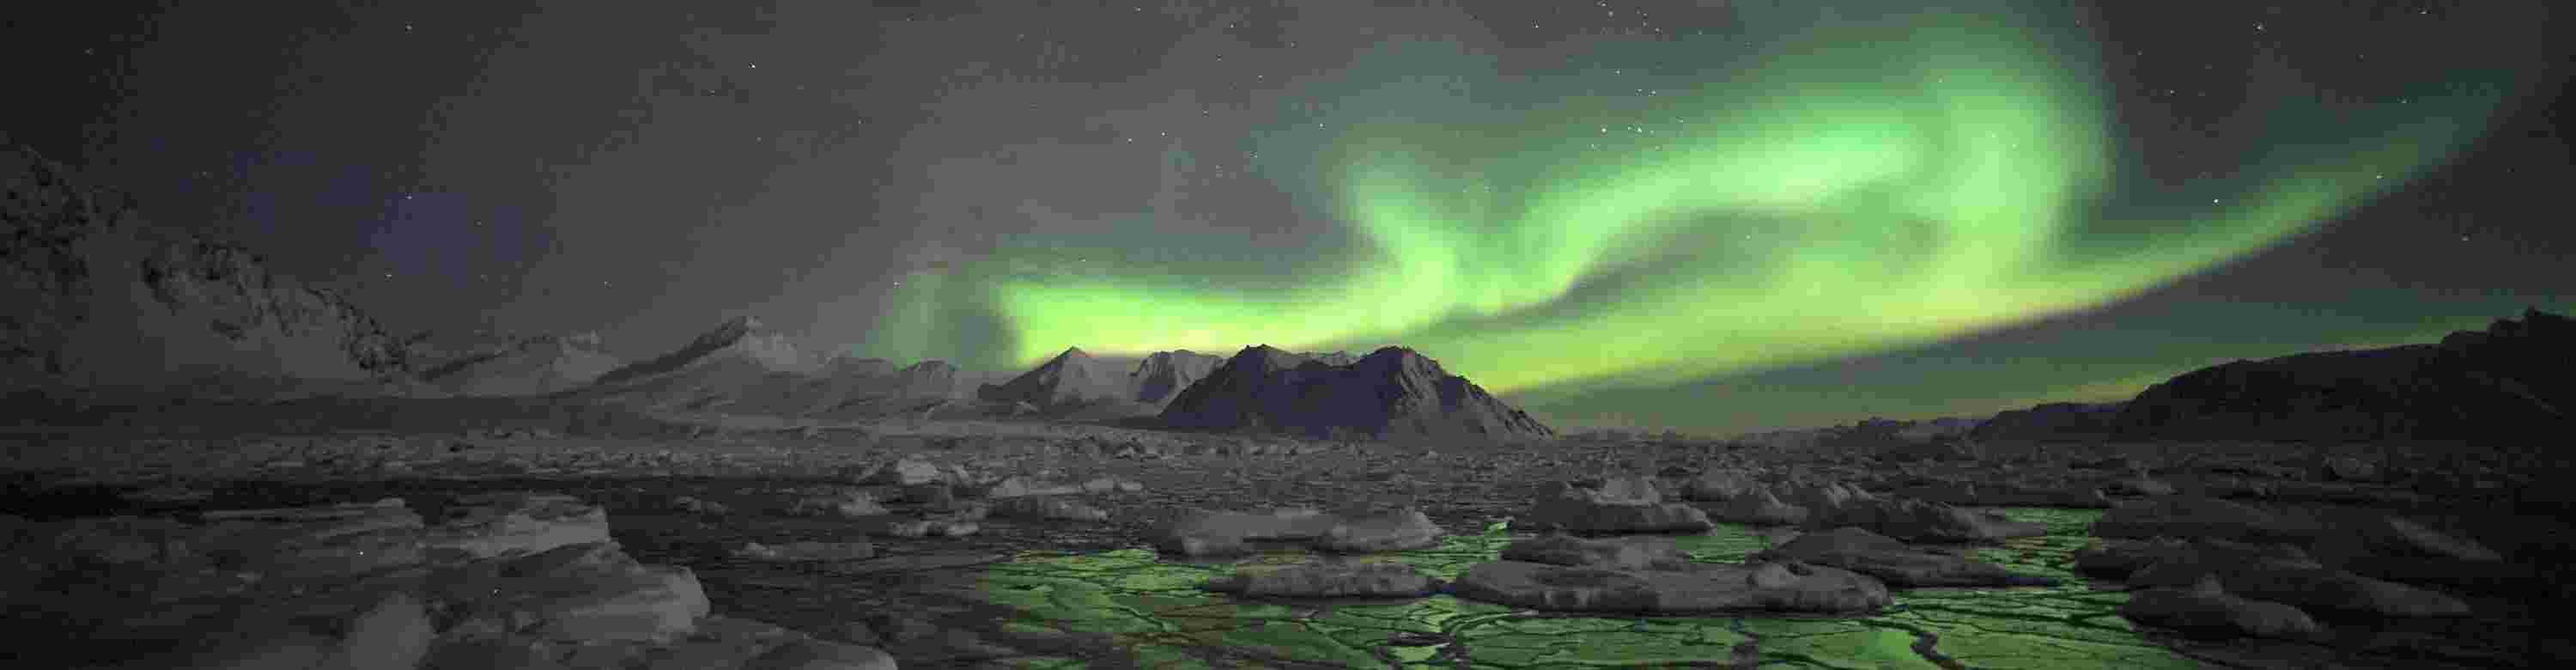 A swirling green lightshow of the Aurora Borealis above a snowy Alaskan landscape